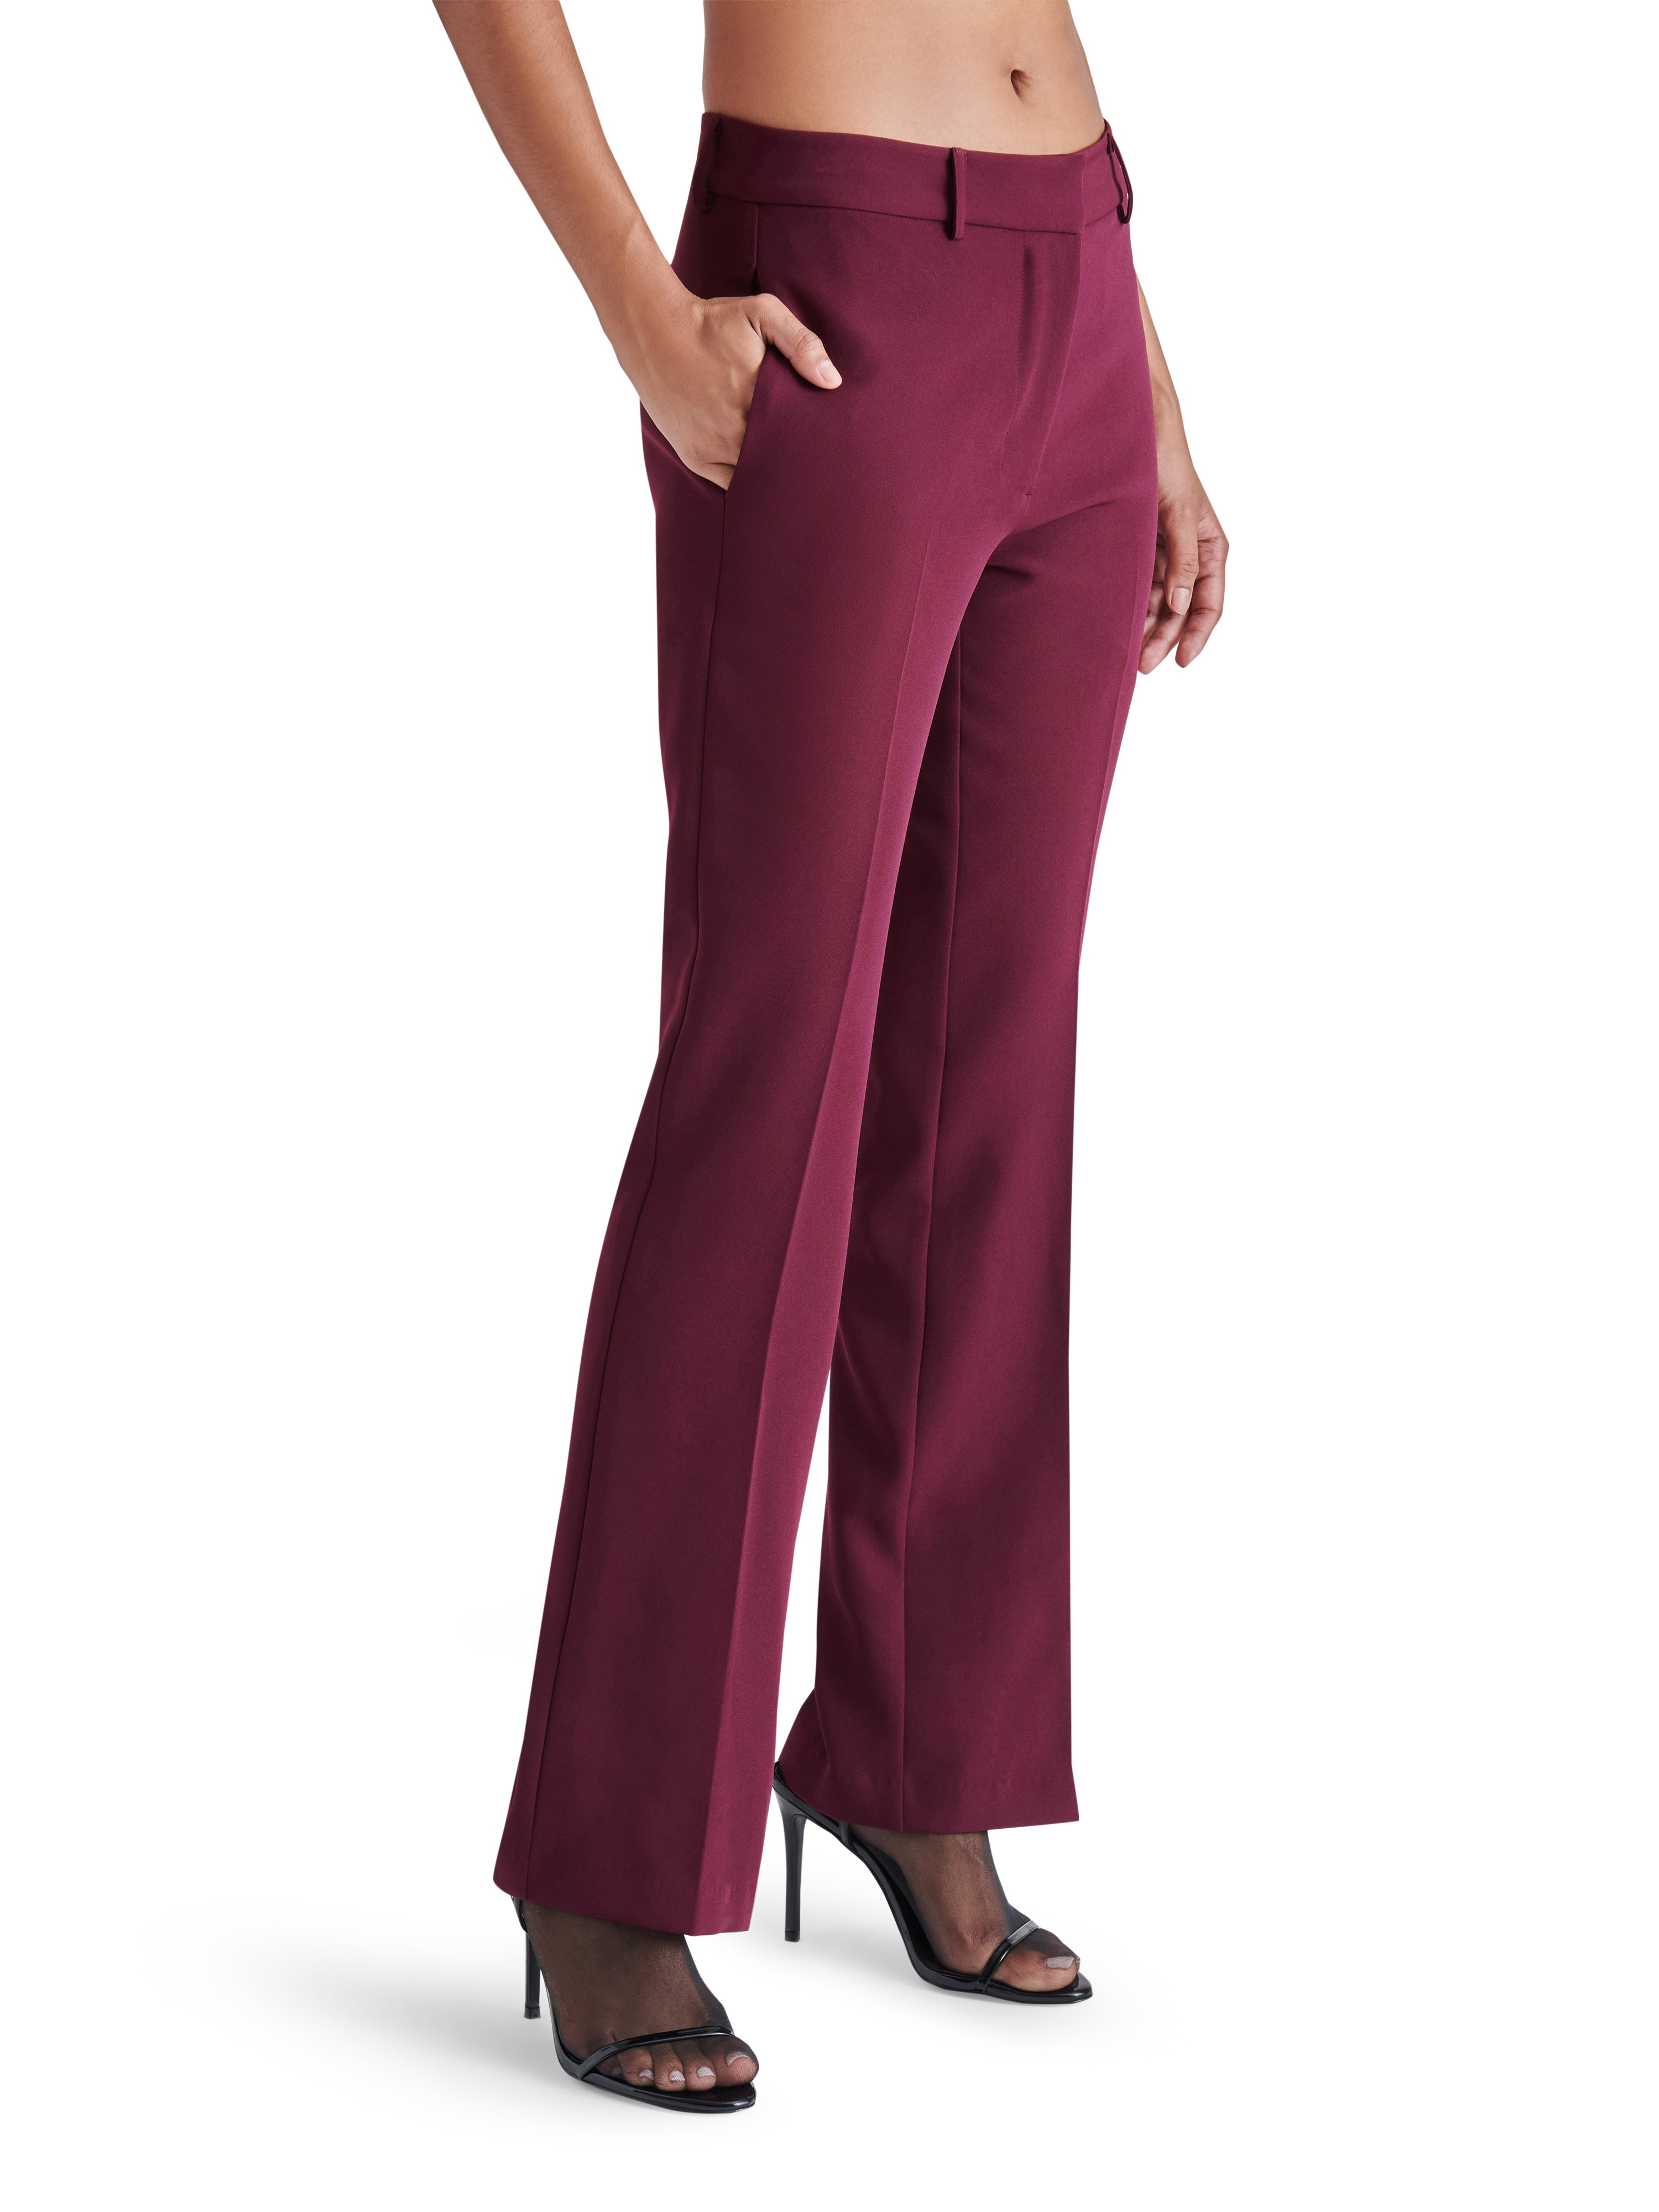 Waverly Pant in Fig